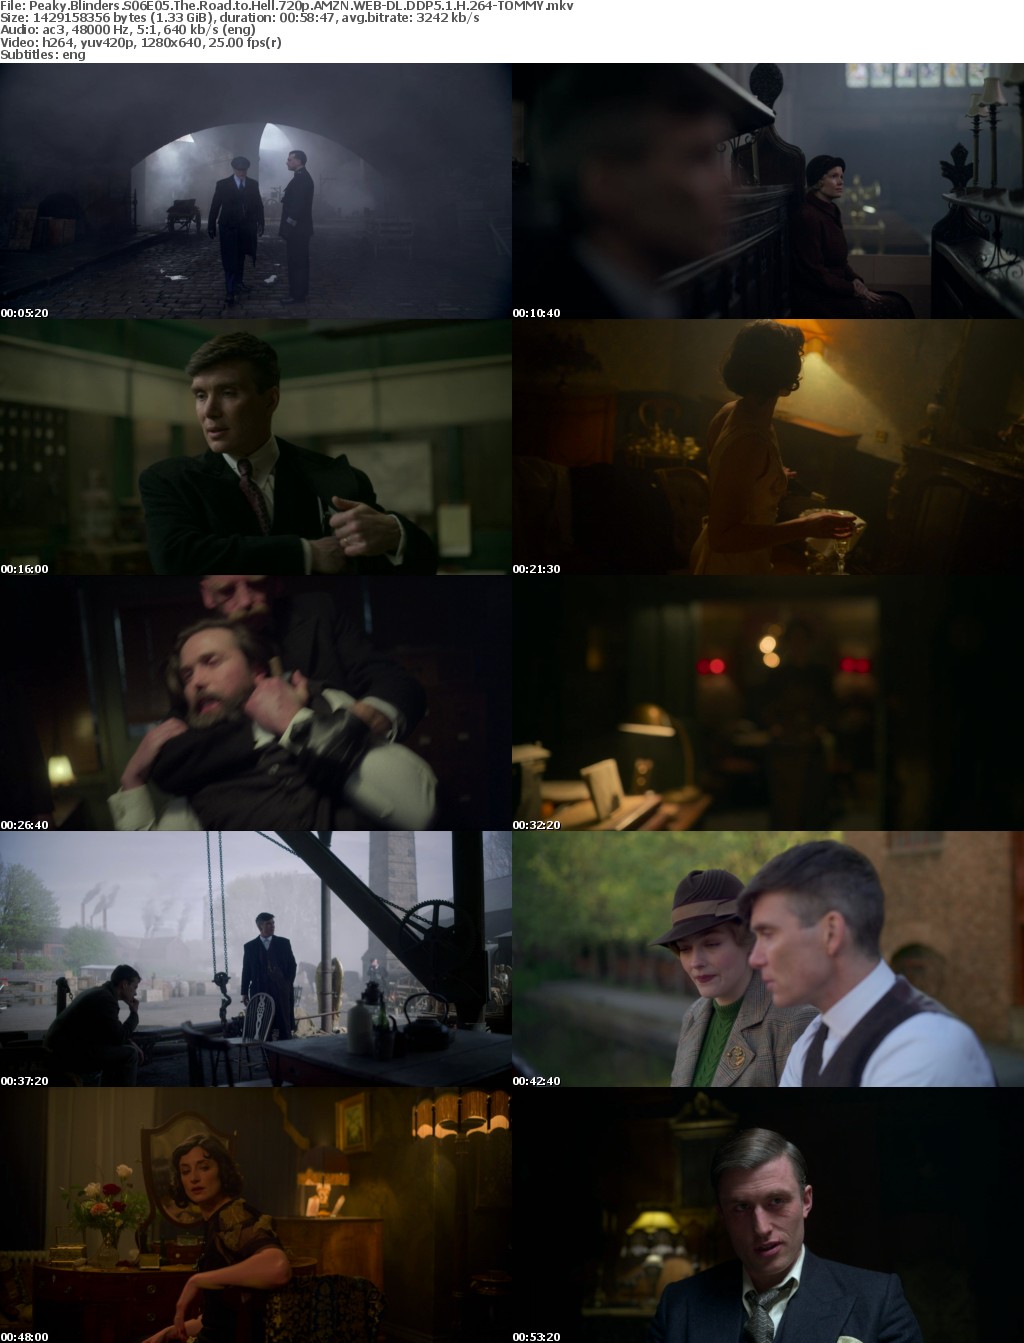 Peaky Blinders S06E05 The Road to Hell 720p AMZN WEBRip DDP5 1 x264-TOMMY